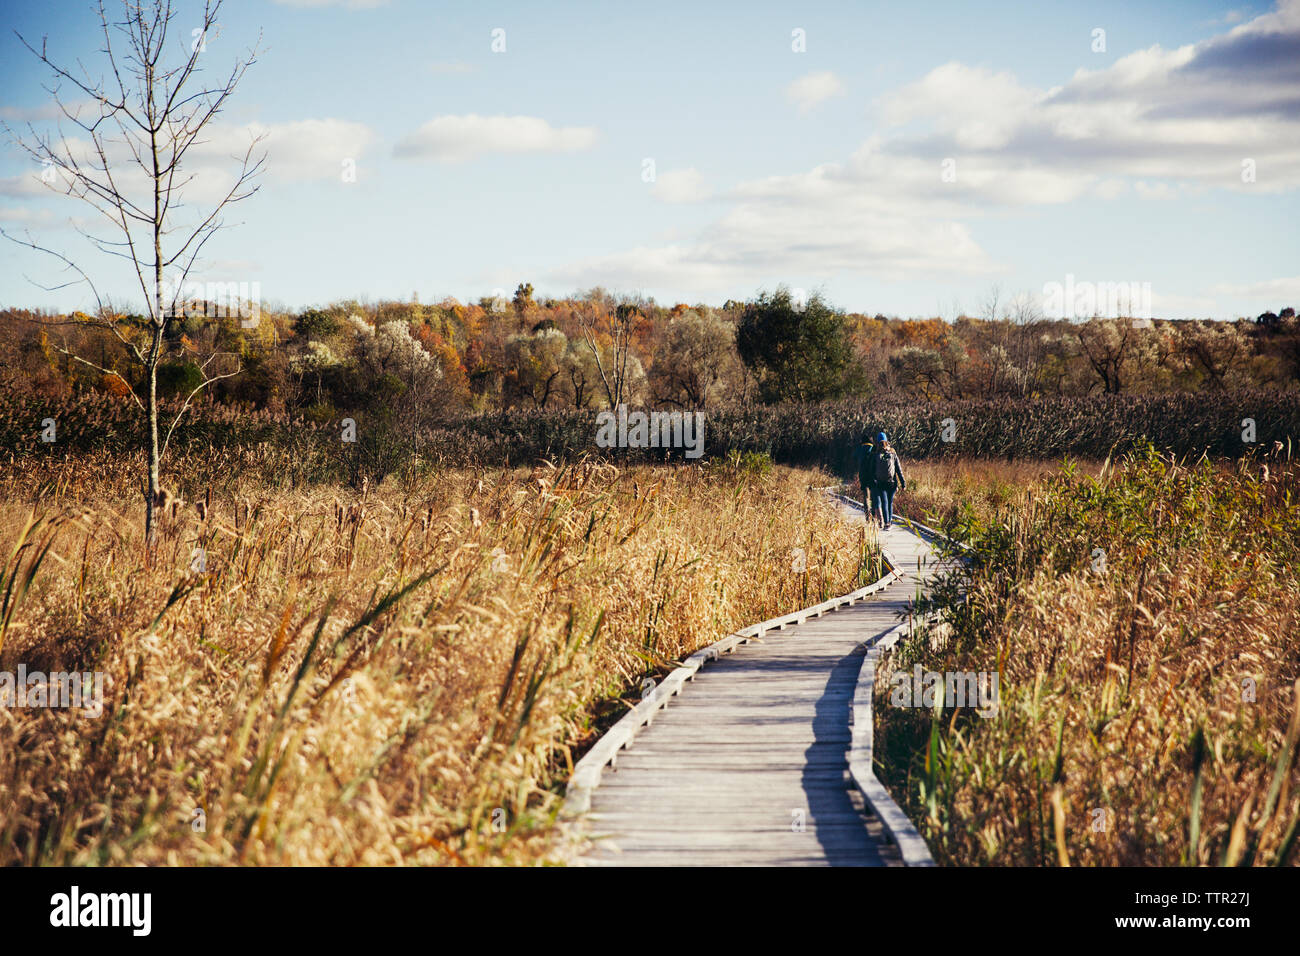 Mid distance of hikers walking on boardwalk amidst field against sky Stock Photo